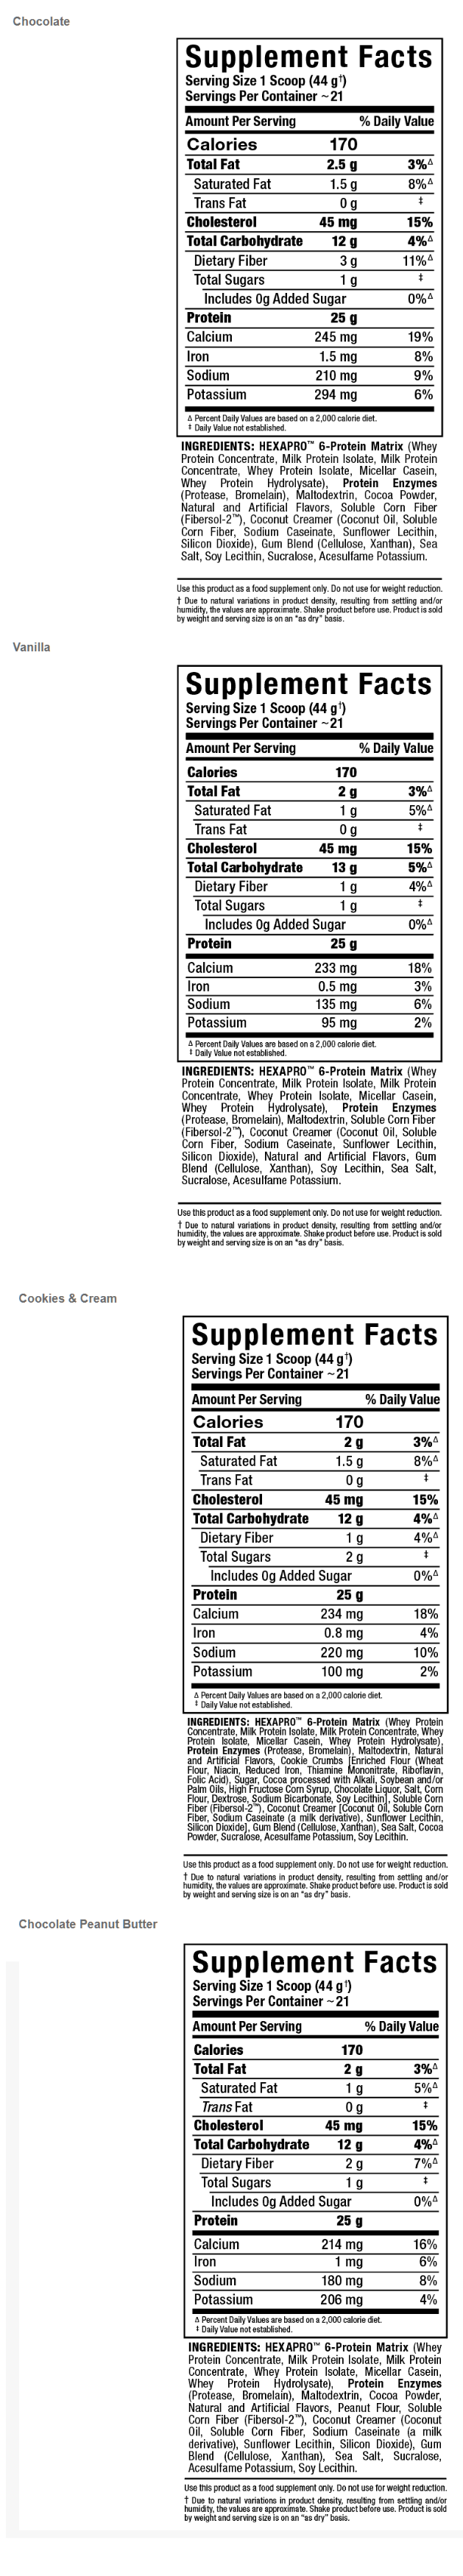 Nutritional information and ingredients for chocolate, vanilla, cookies & cream, and chocolate peanut butter dietary supplement. One scoop serving size.